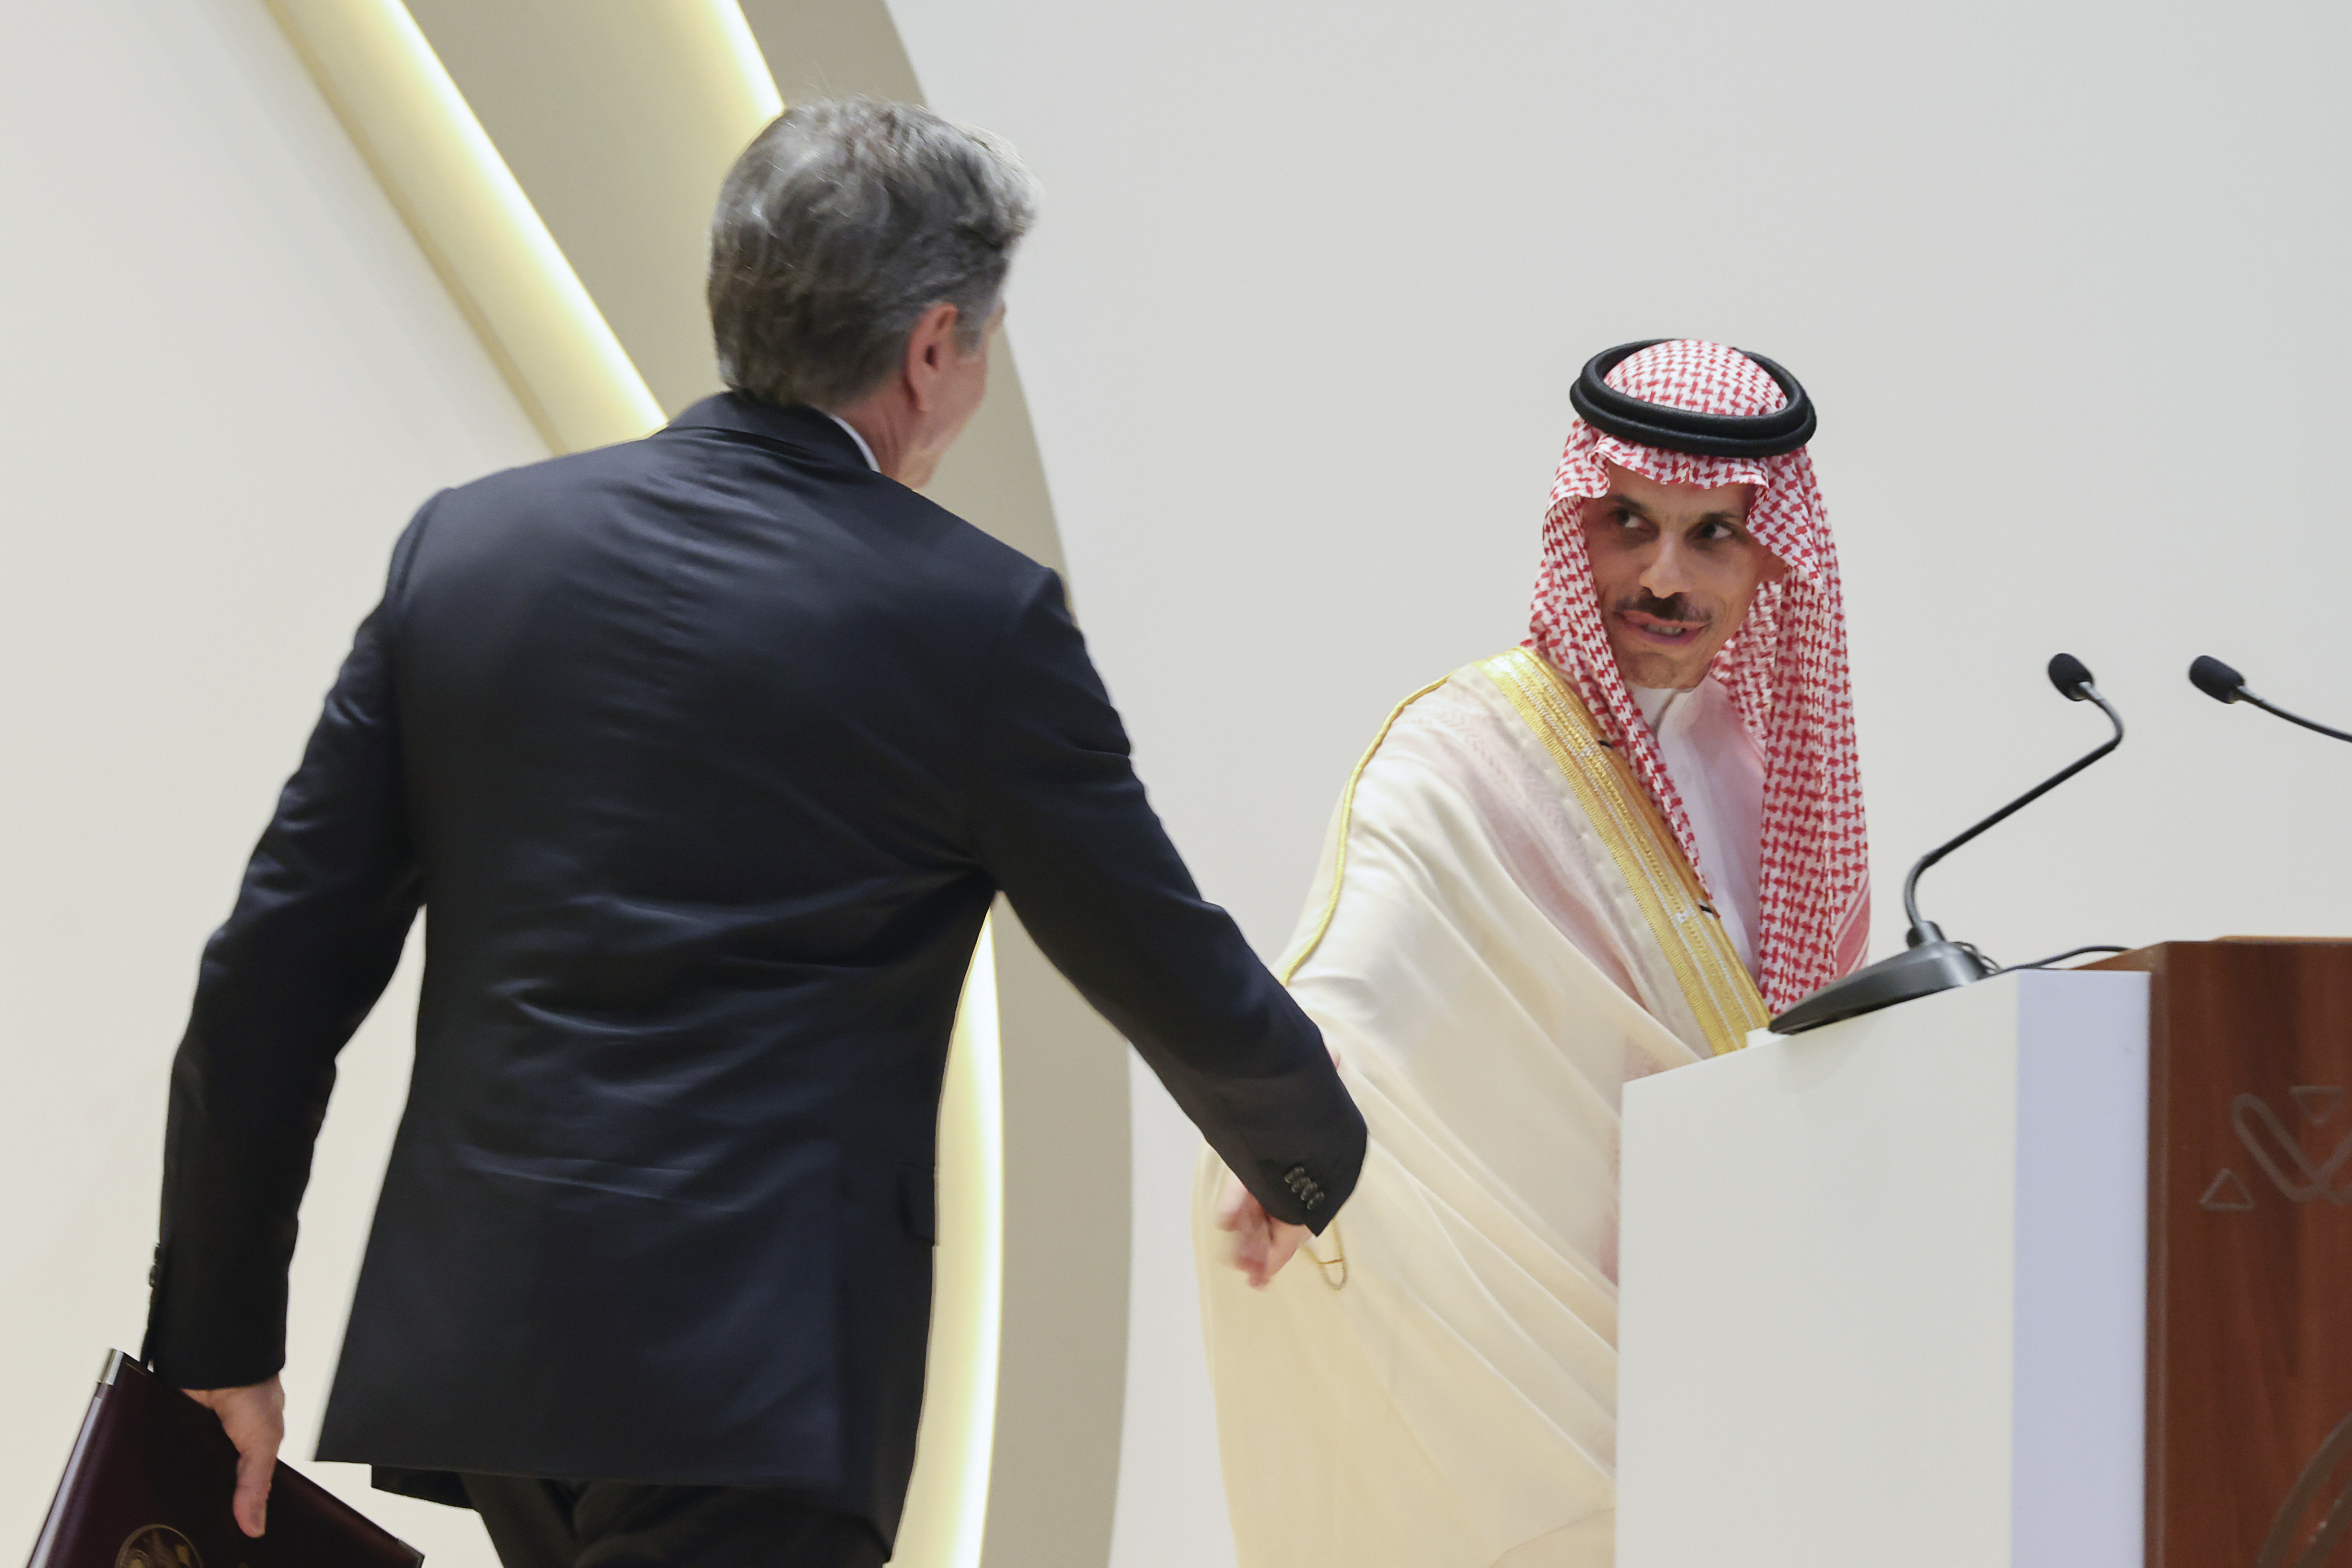 US Secretary of State Antony Blinken shakes hands with Saudi Arabia’s Foreign Minister Prince Faisal bin Farhan during a joint news conference at the Intercontinental Hotel in Riyadh on Thursday. Photo: AP